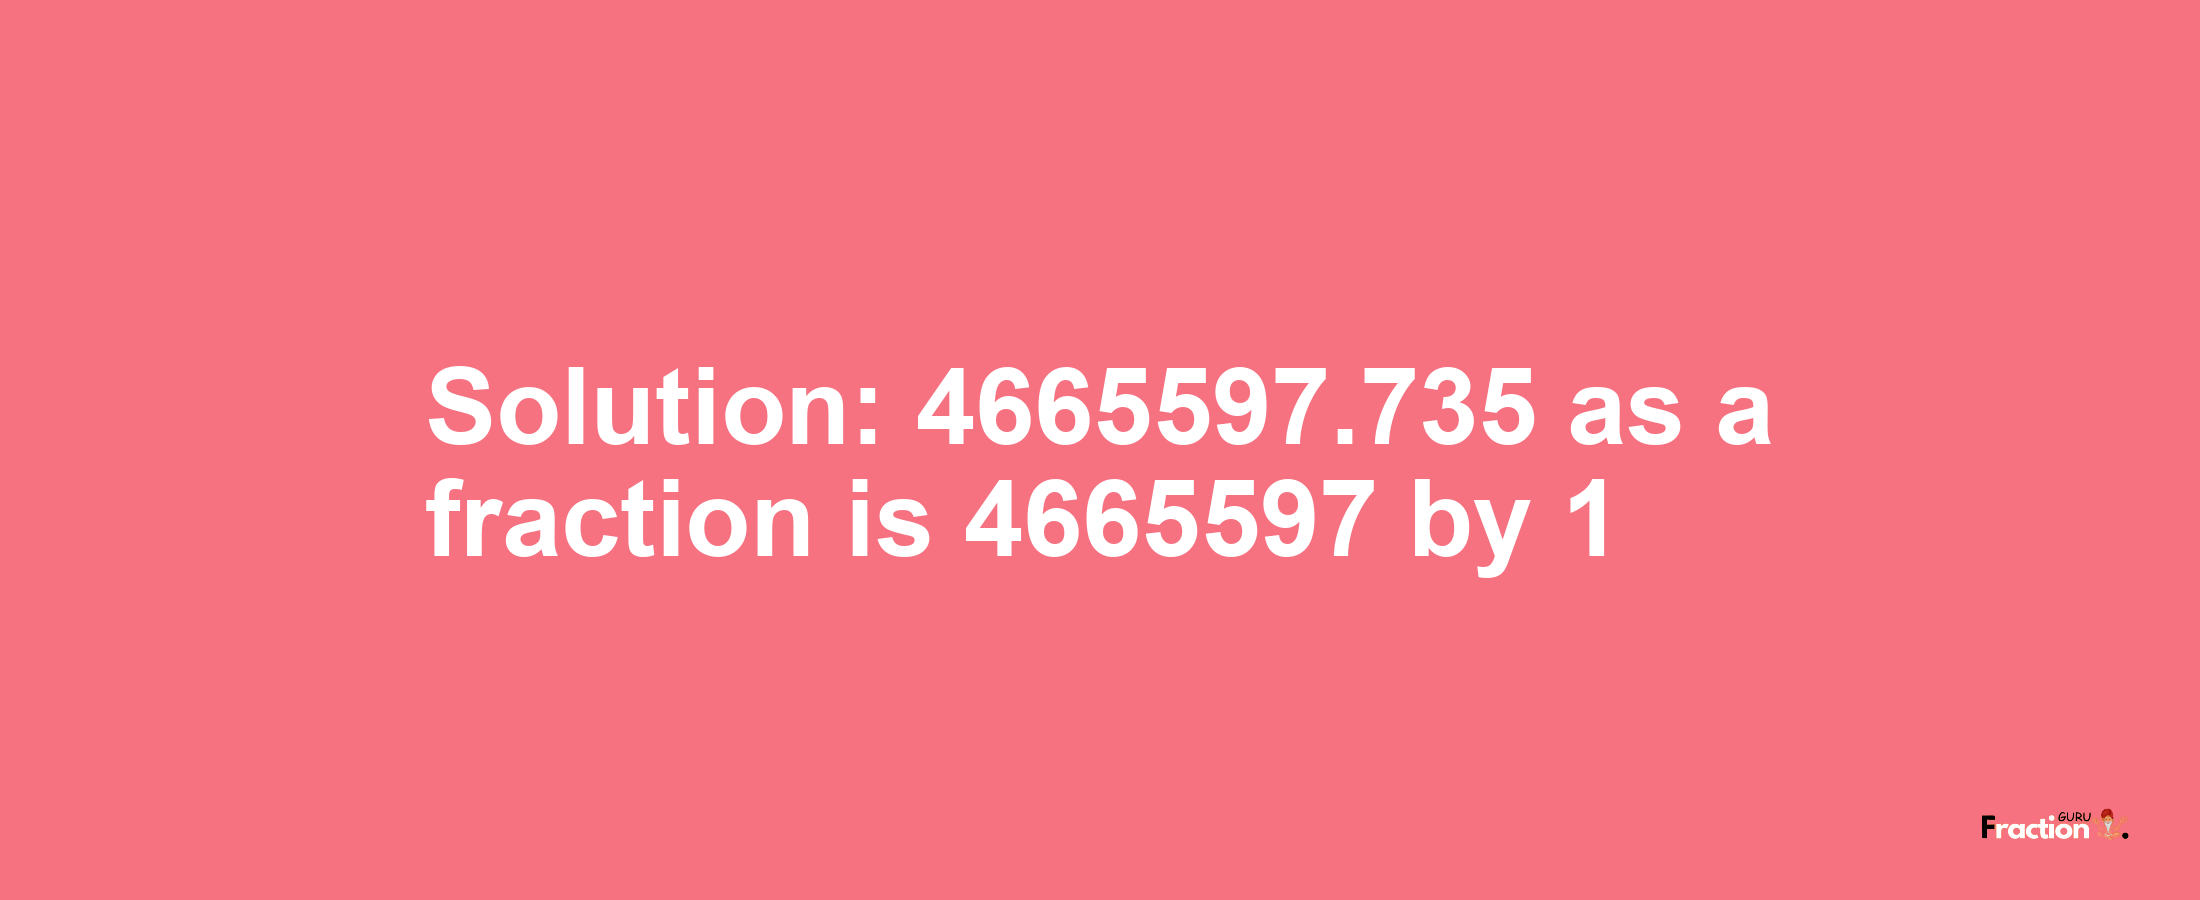 Solution:4665597.735 as a fraction is 4665597/1